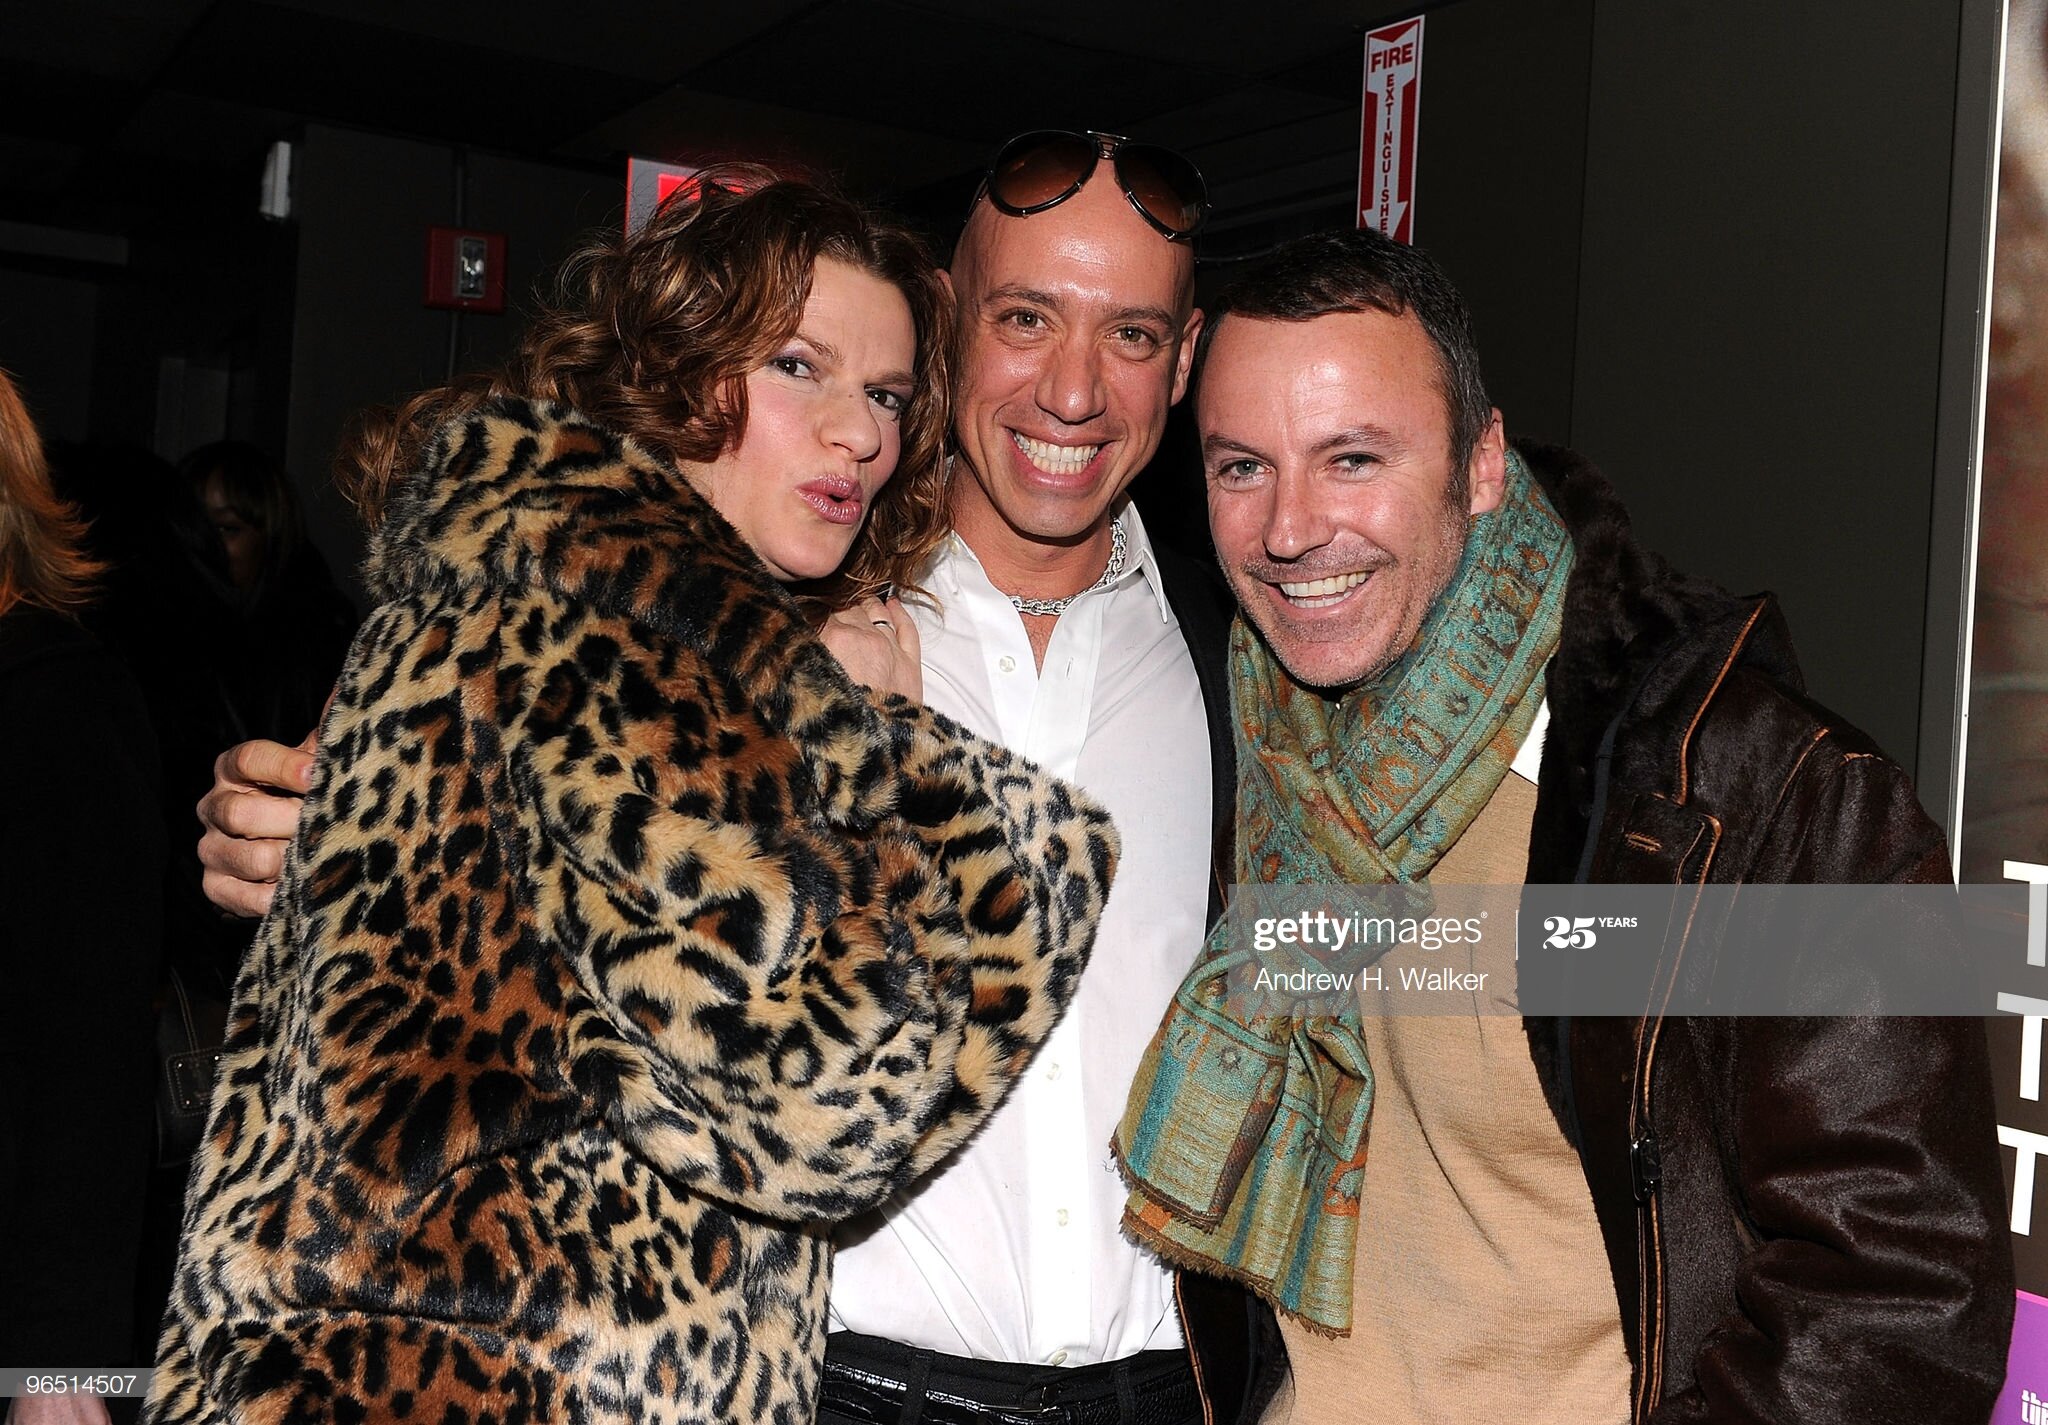  NEW YORK - FEBRUARY 08:  (L-R) Sandra Bernhard, Robert Verdi and Colin Cowie attend the premiere screening of "The Robert Verdi Show Starring Robert Verdi" at the SVA Theater on February 8, 2010 in New York City.  (Photo by Andrew H. Walker/Getty Im